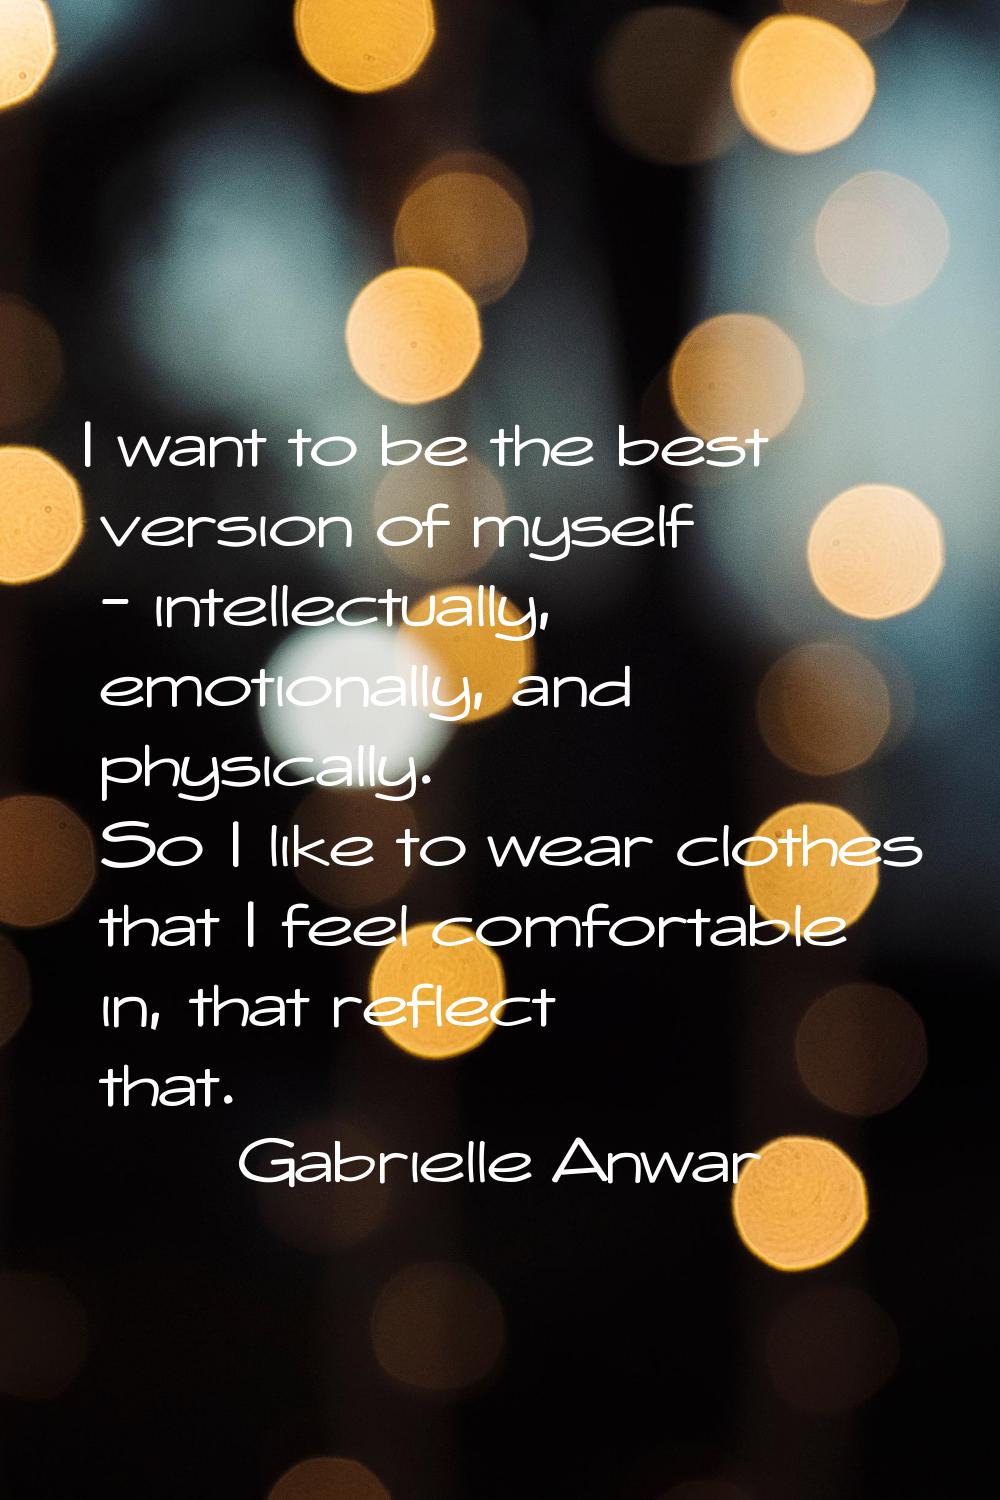 I want to be the best version of myself - intellectually, emotionally, and physically. So I like to